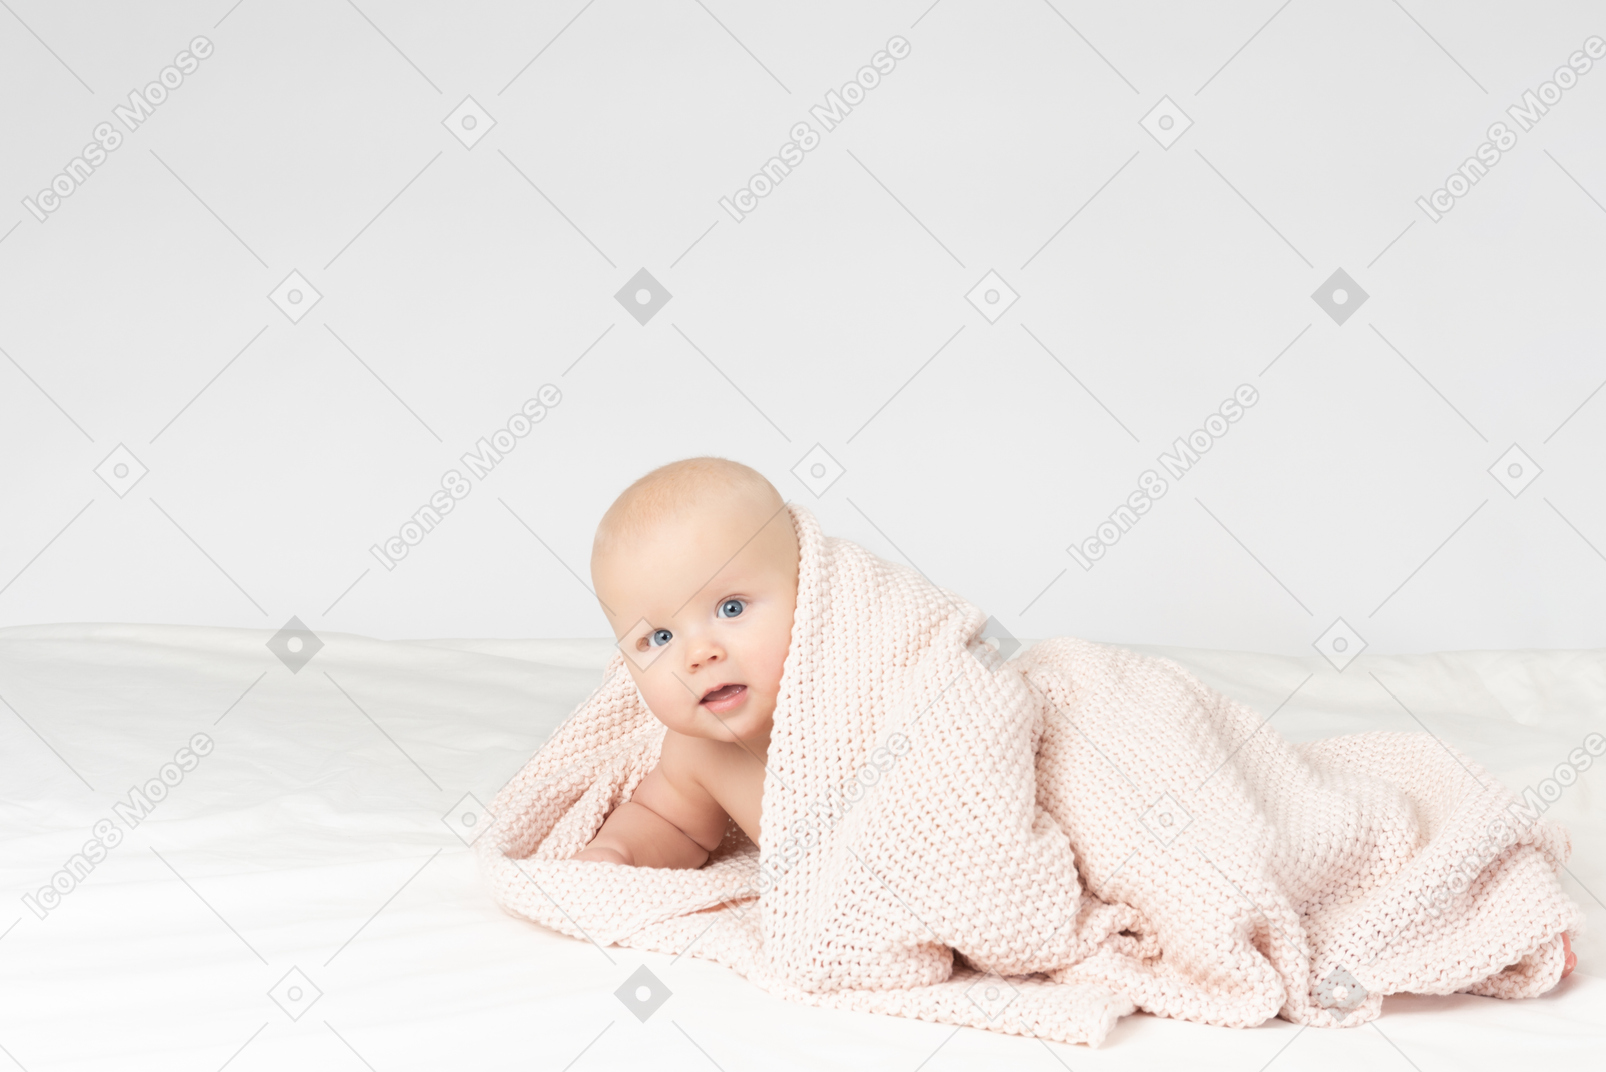 Smiling baby boy covered in beige knitted blanket